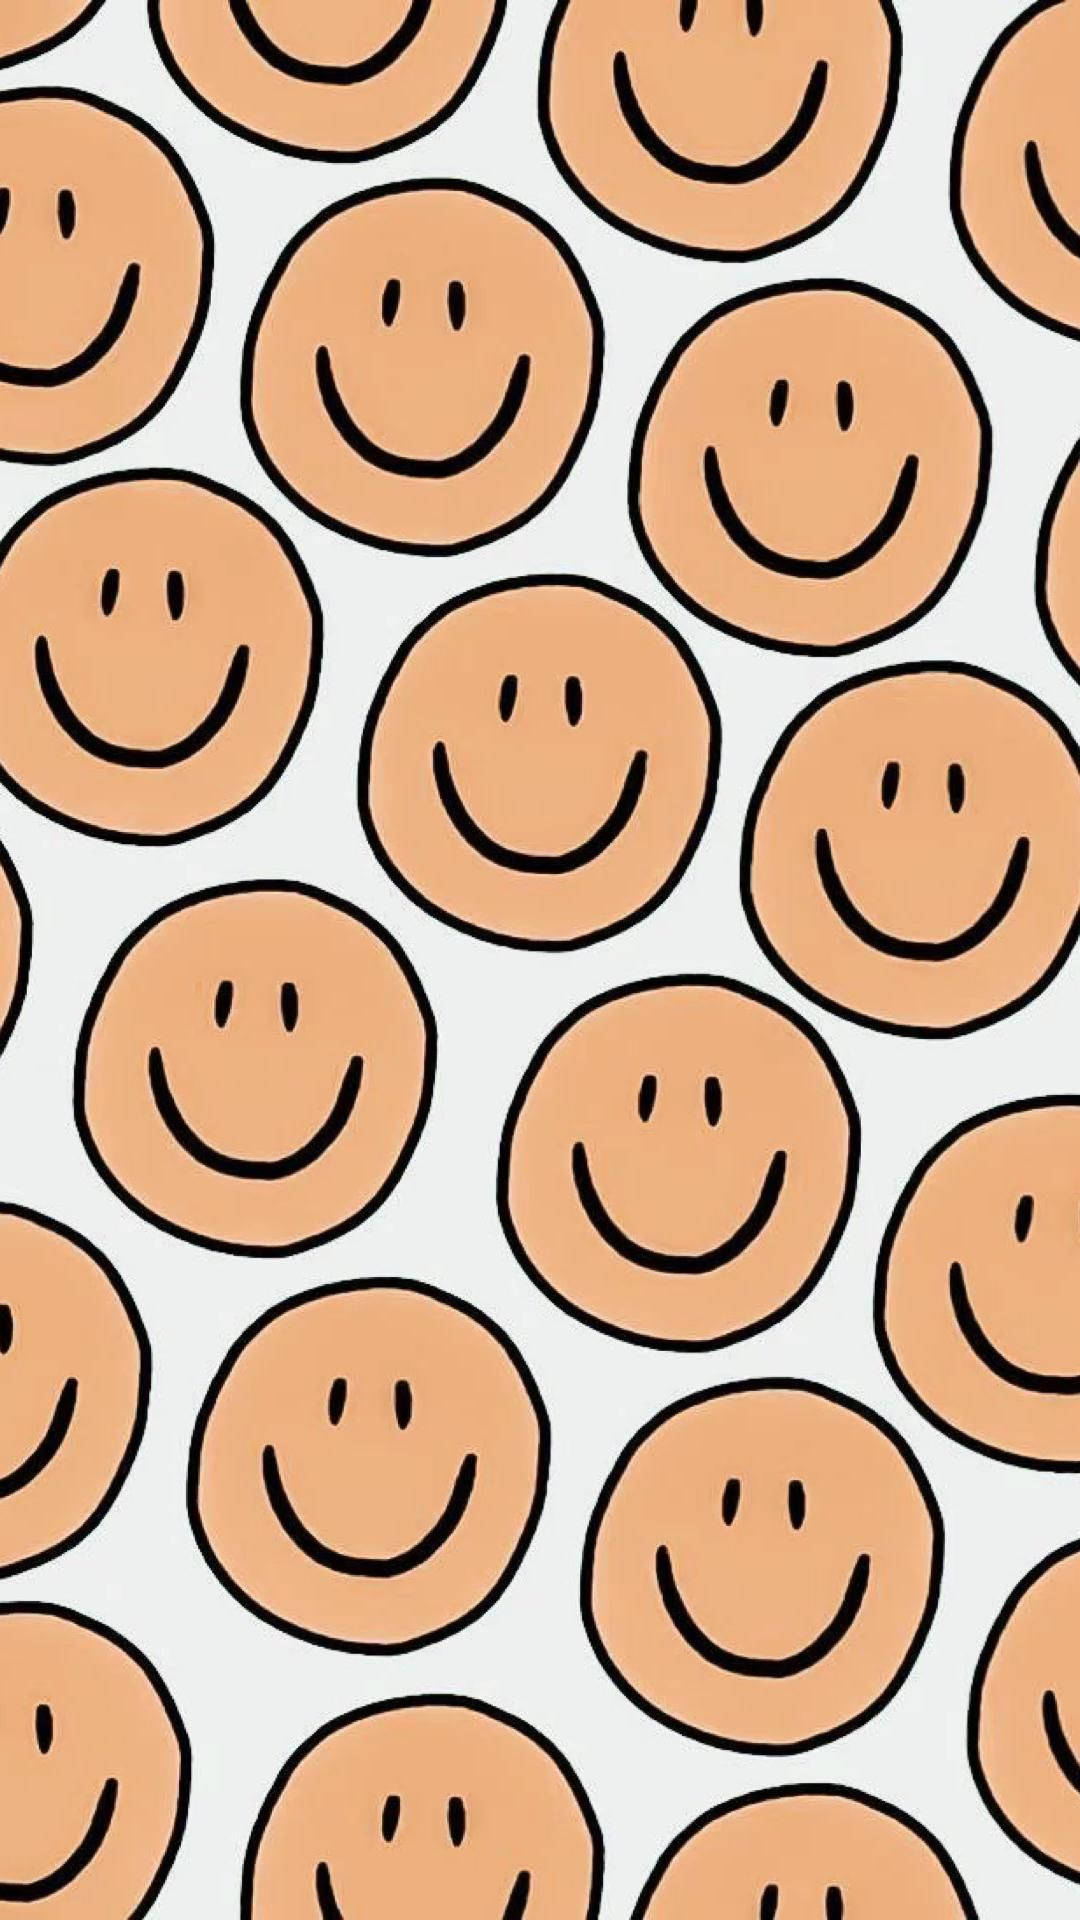 Buy Melty Smiley Face SVG Cell Phone Wallpaper Funky Wallpaper Online in  India  Etsy